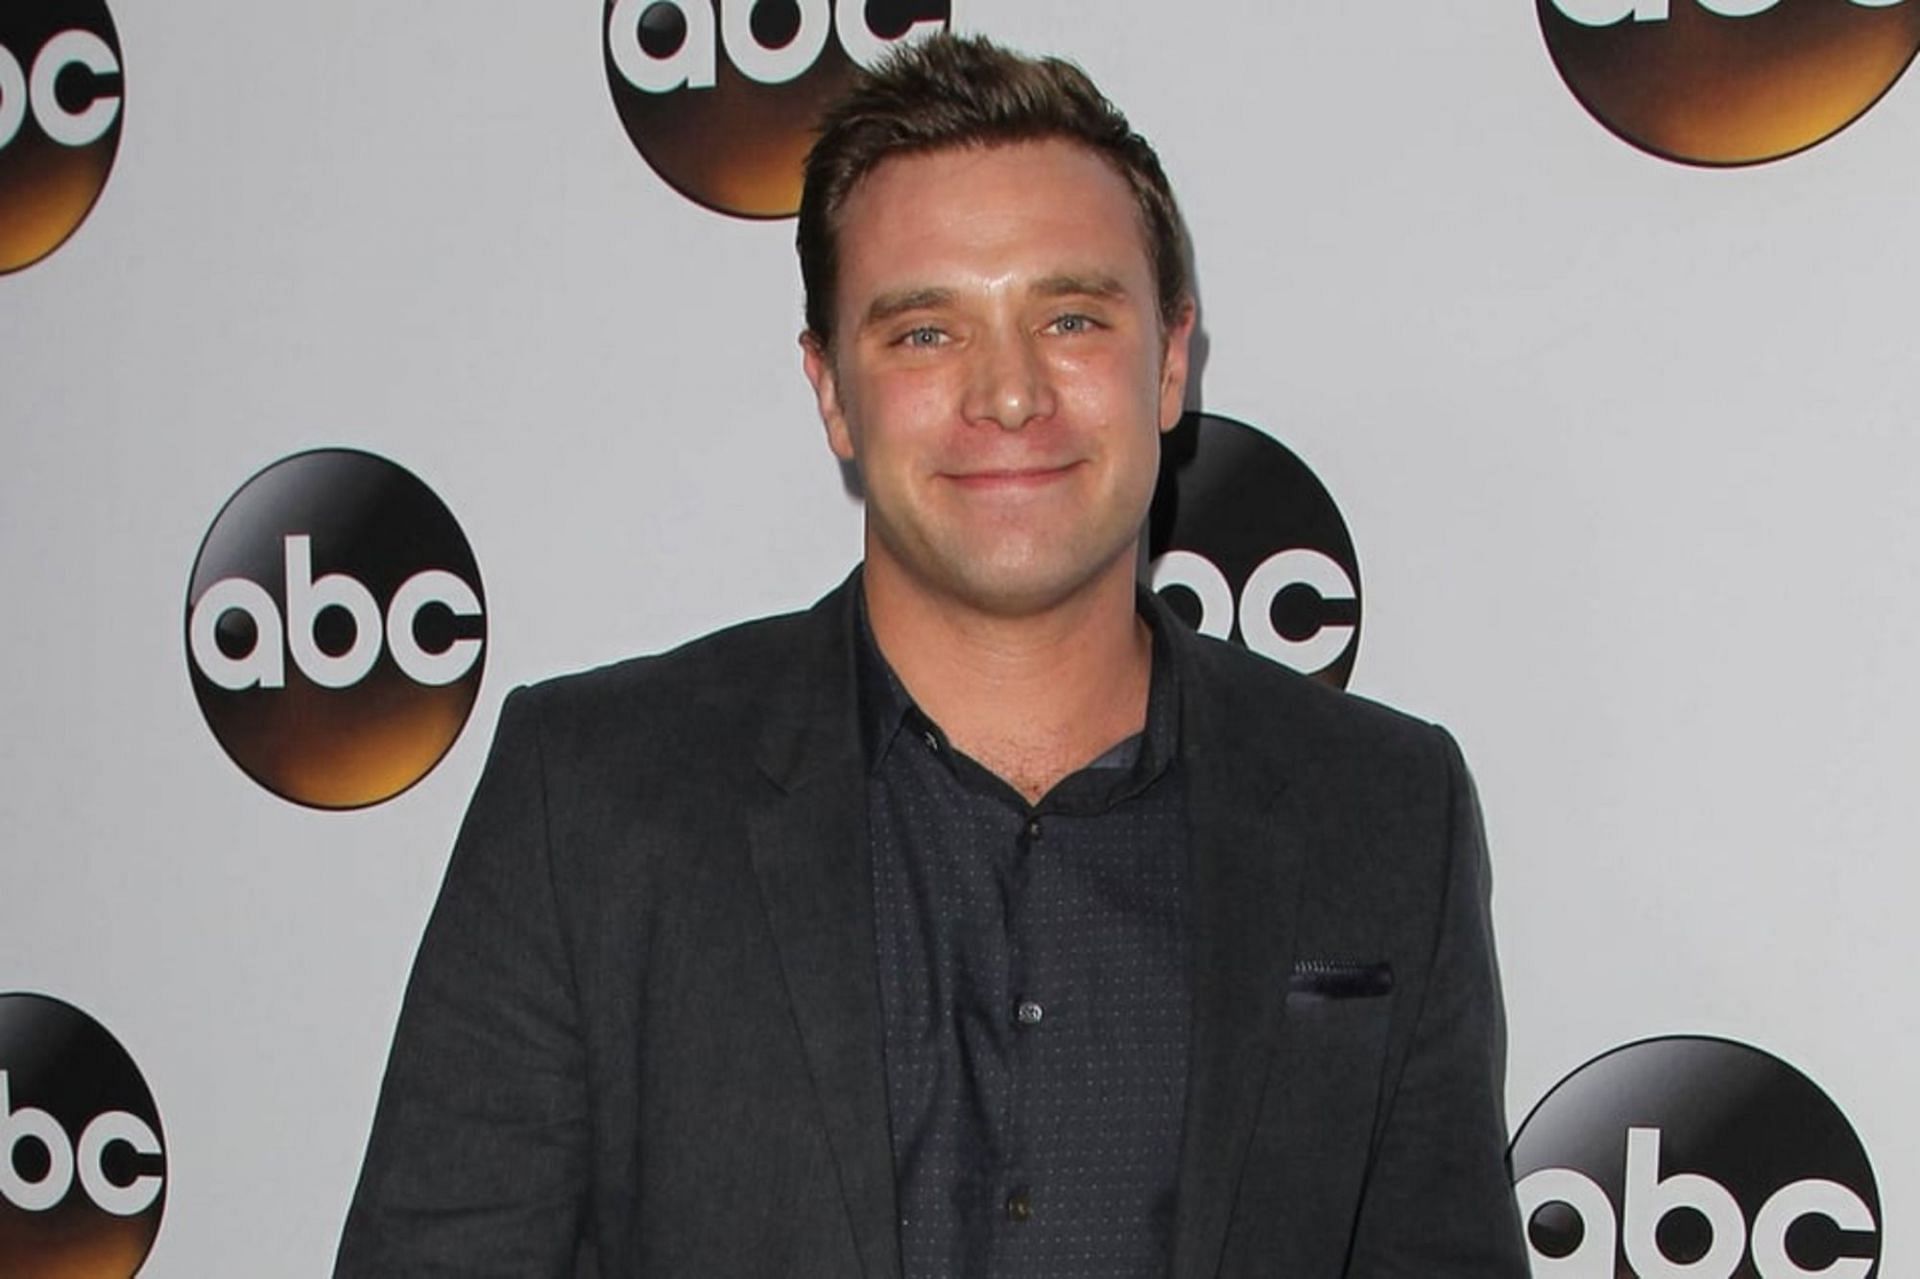 Billy Miller passes away at the age of 43 following Progressive Supranuclear Palsy battle (Image via Getty Images)